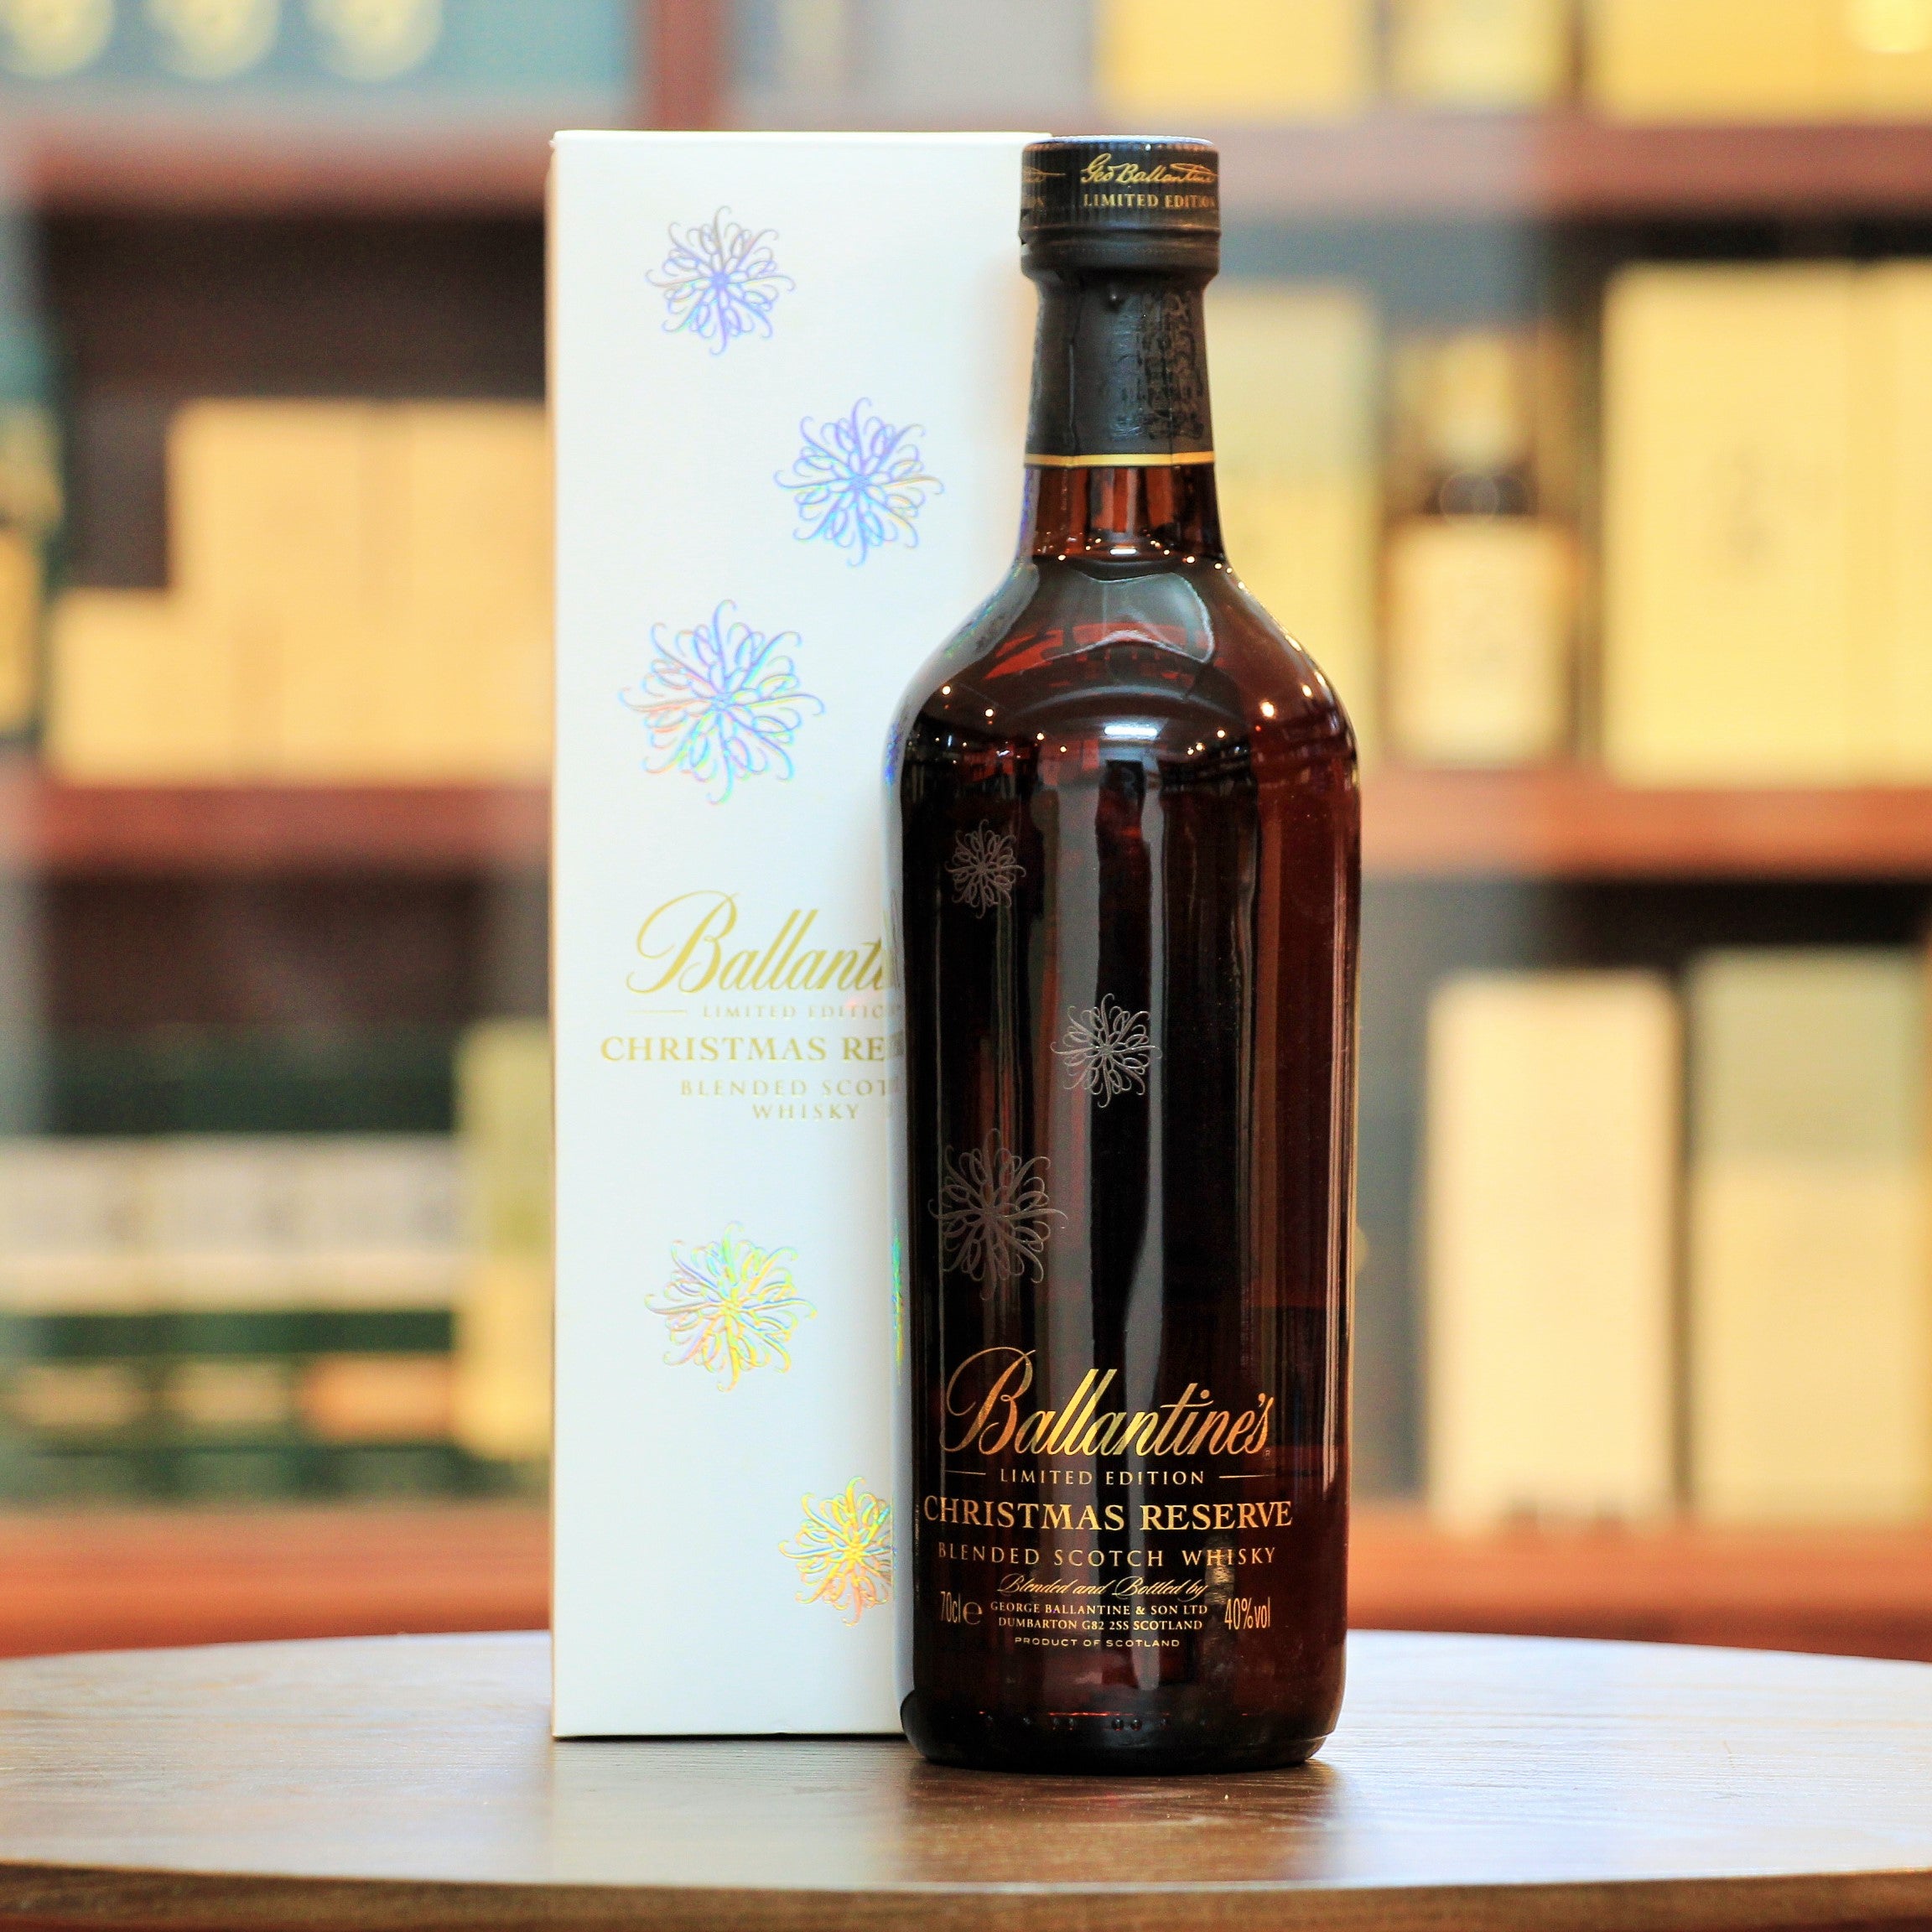 Ballantine's Christmas Reserve 2013 Limited Edition, A unique blend from the Chivas Brothers, the Ballantine's Christmas Reserve is created with the festive season in mind featuring huge sherry notes, rich dried fruits, christmas cake perfect for a celebration.